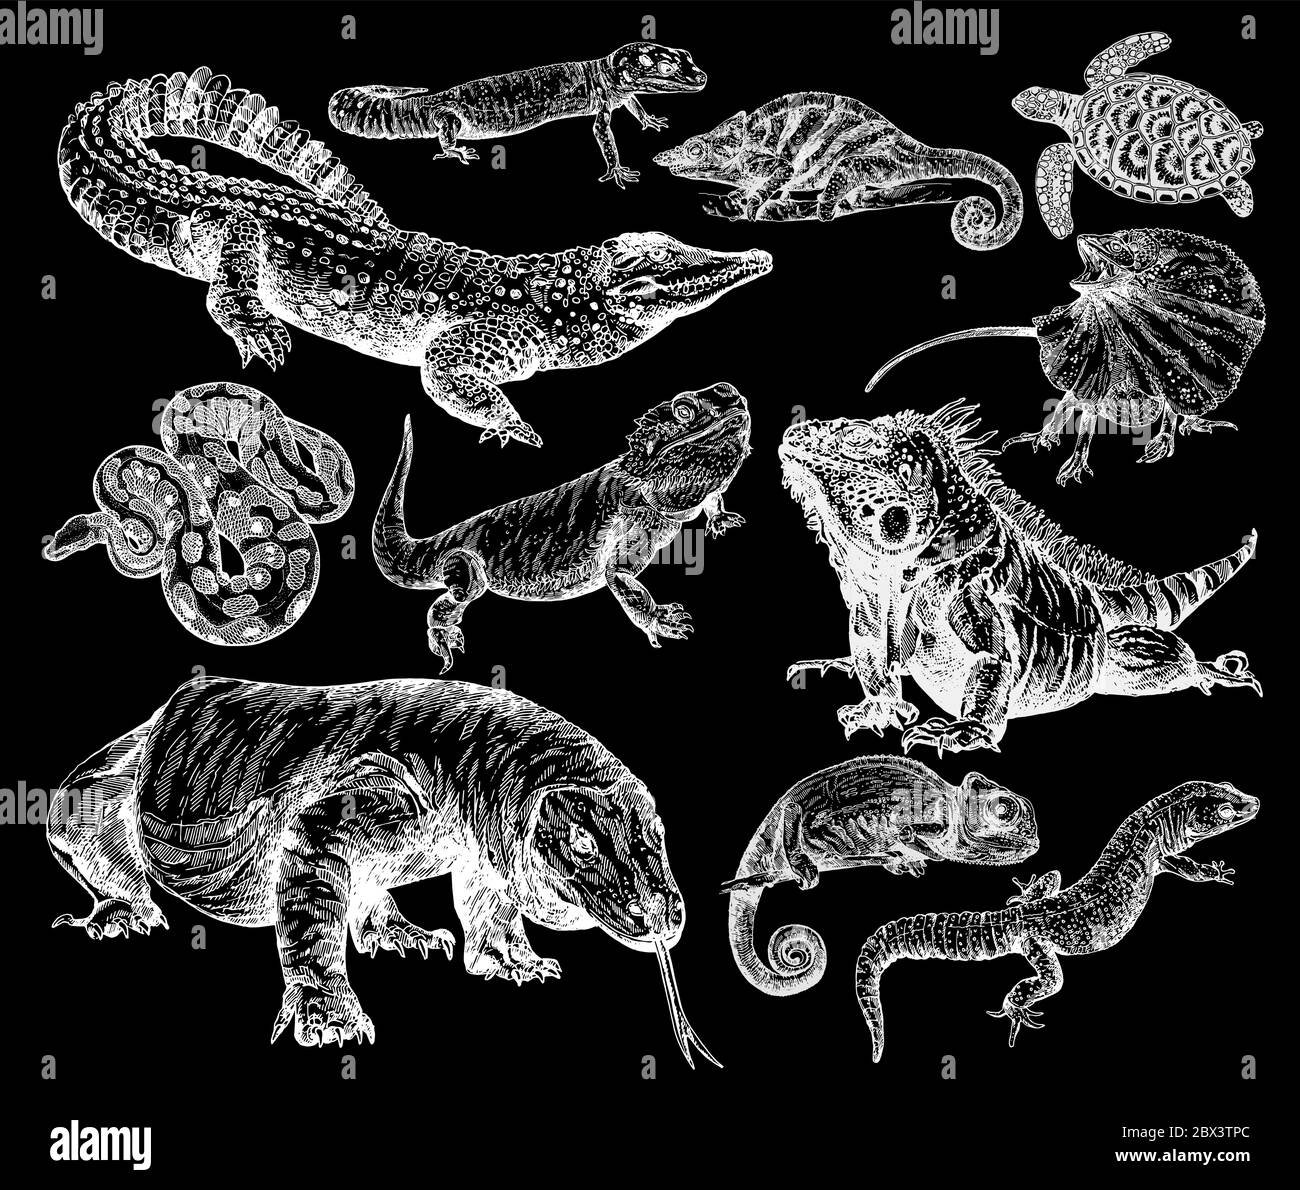 Big set of hand drawn sketch style reptiles isolated on black background. Vector illustration. Stock Vector